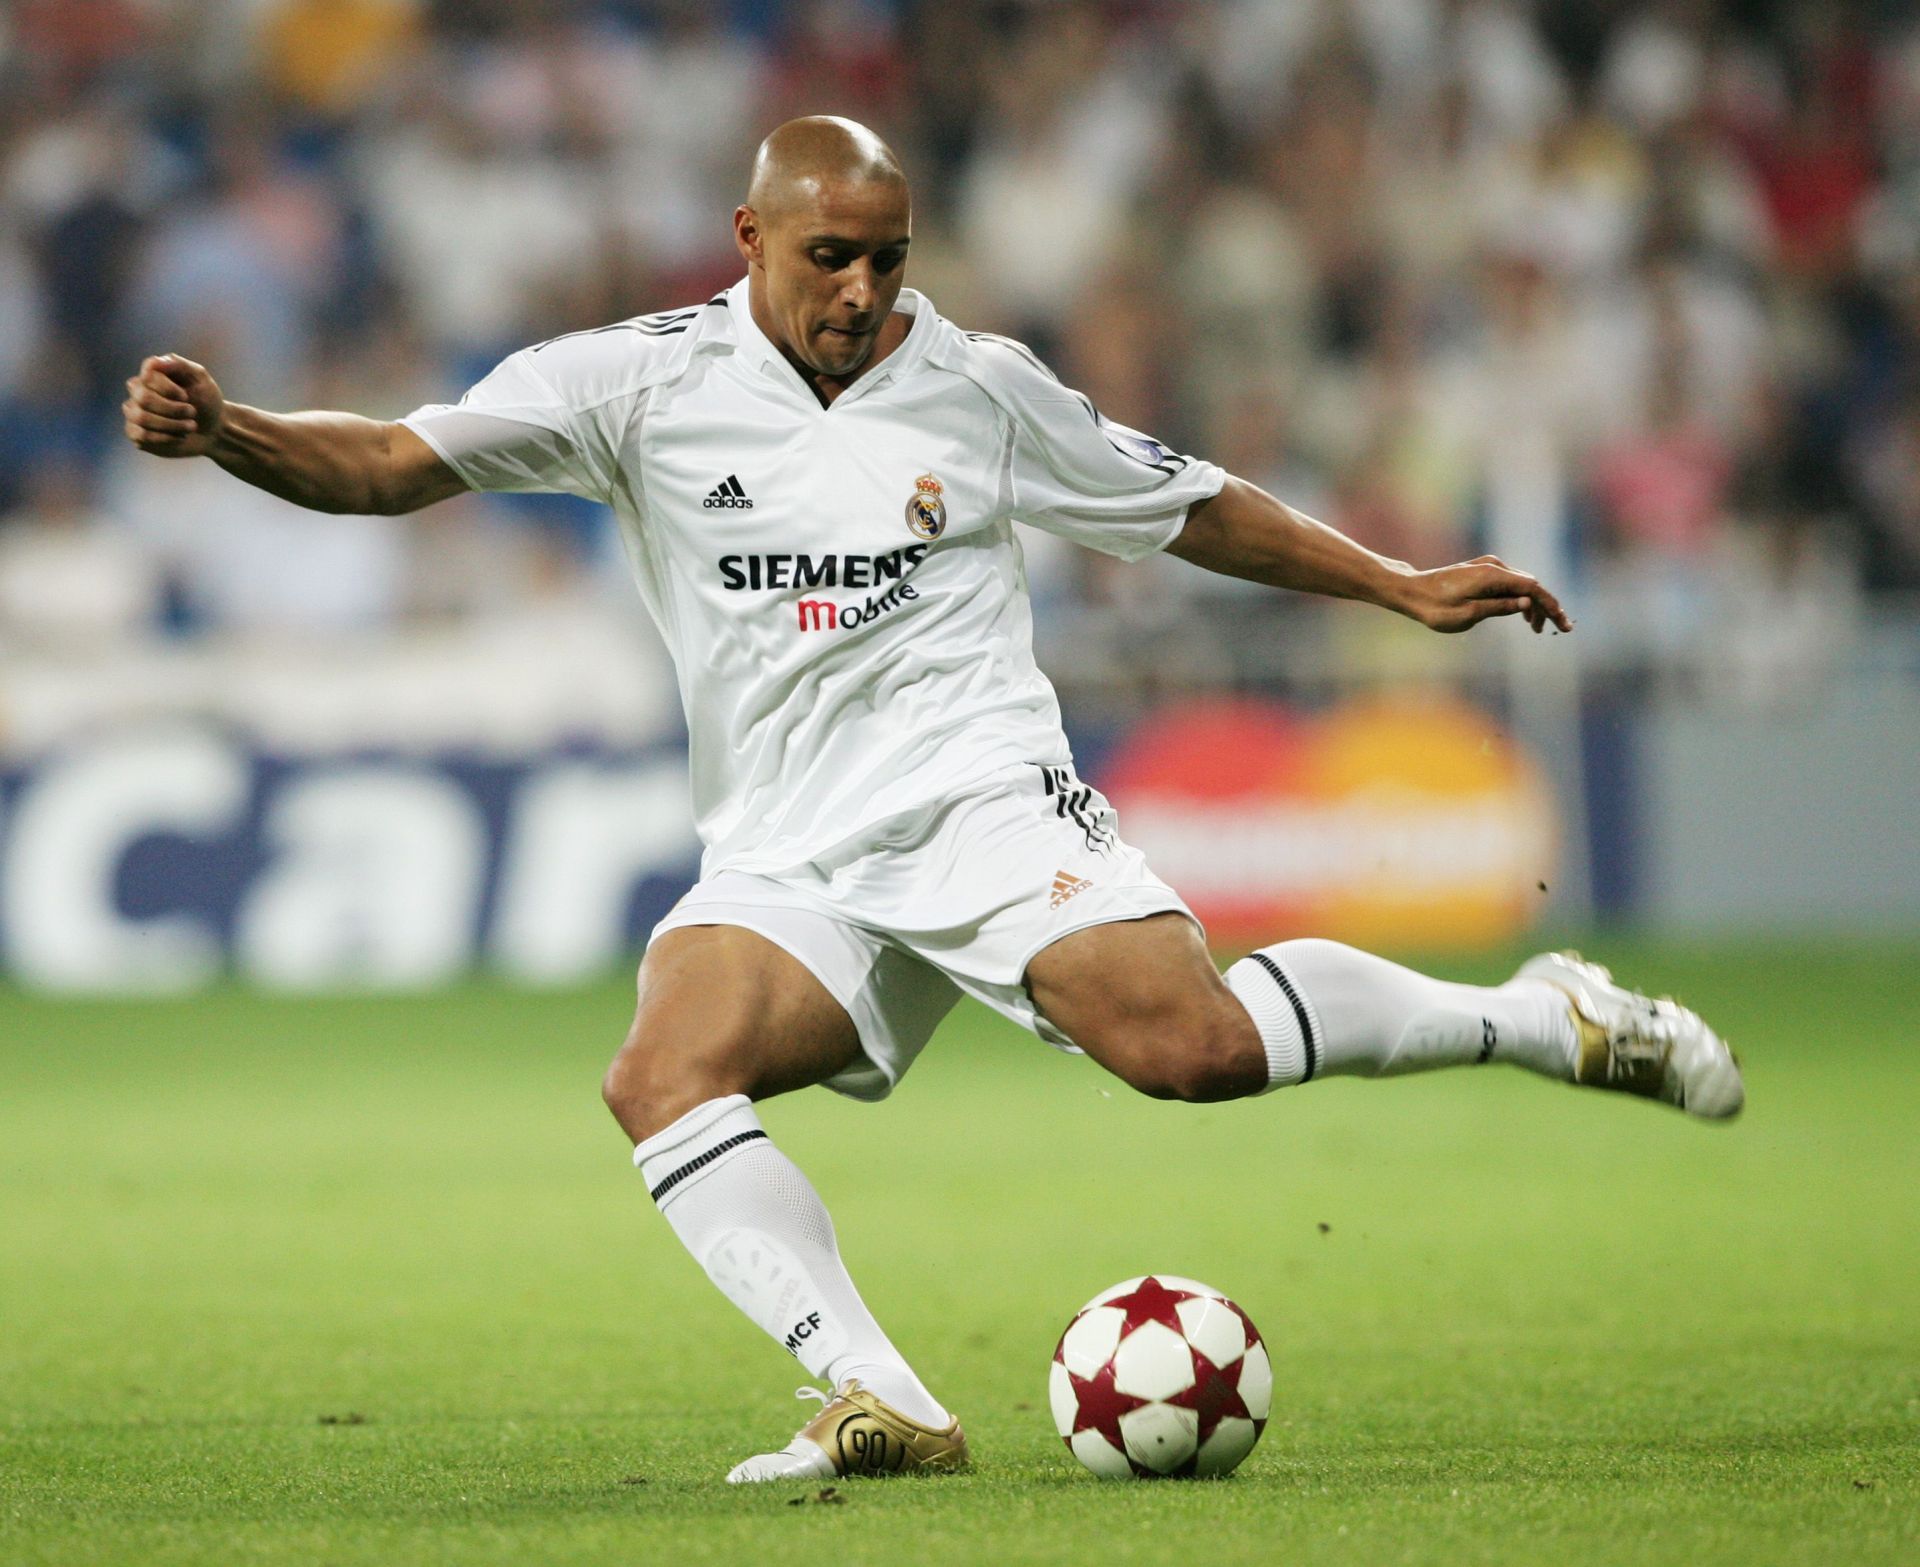 Former Real Madrid star Roberto Carlos excelled at dead-ball situations for both club and country